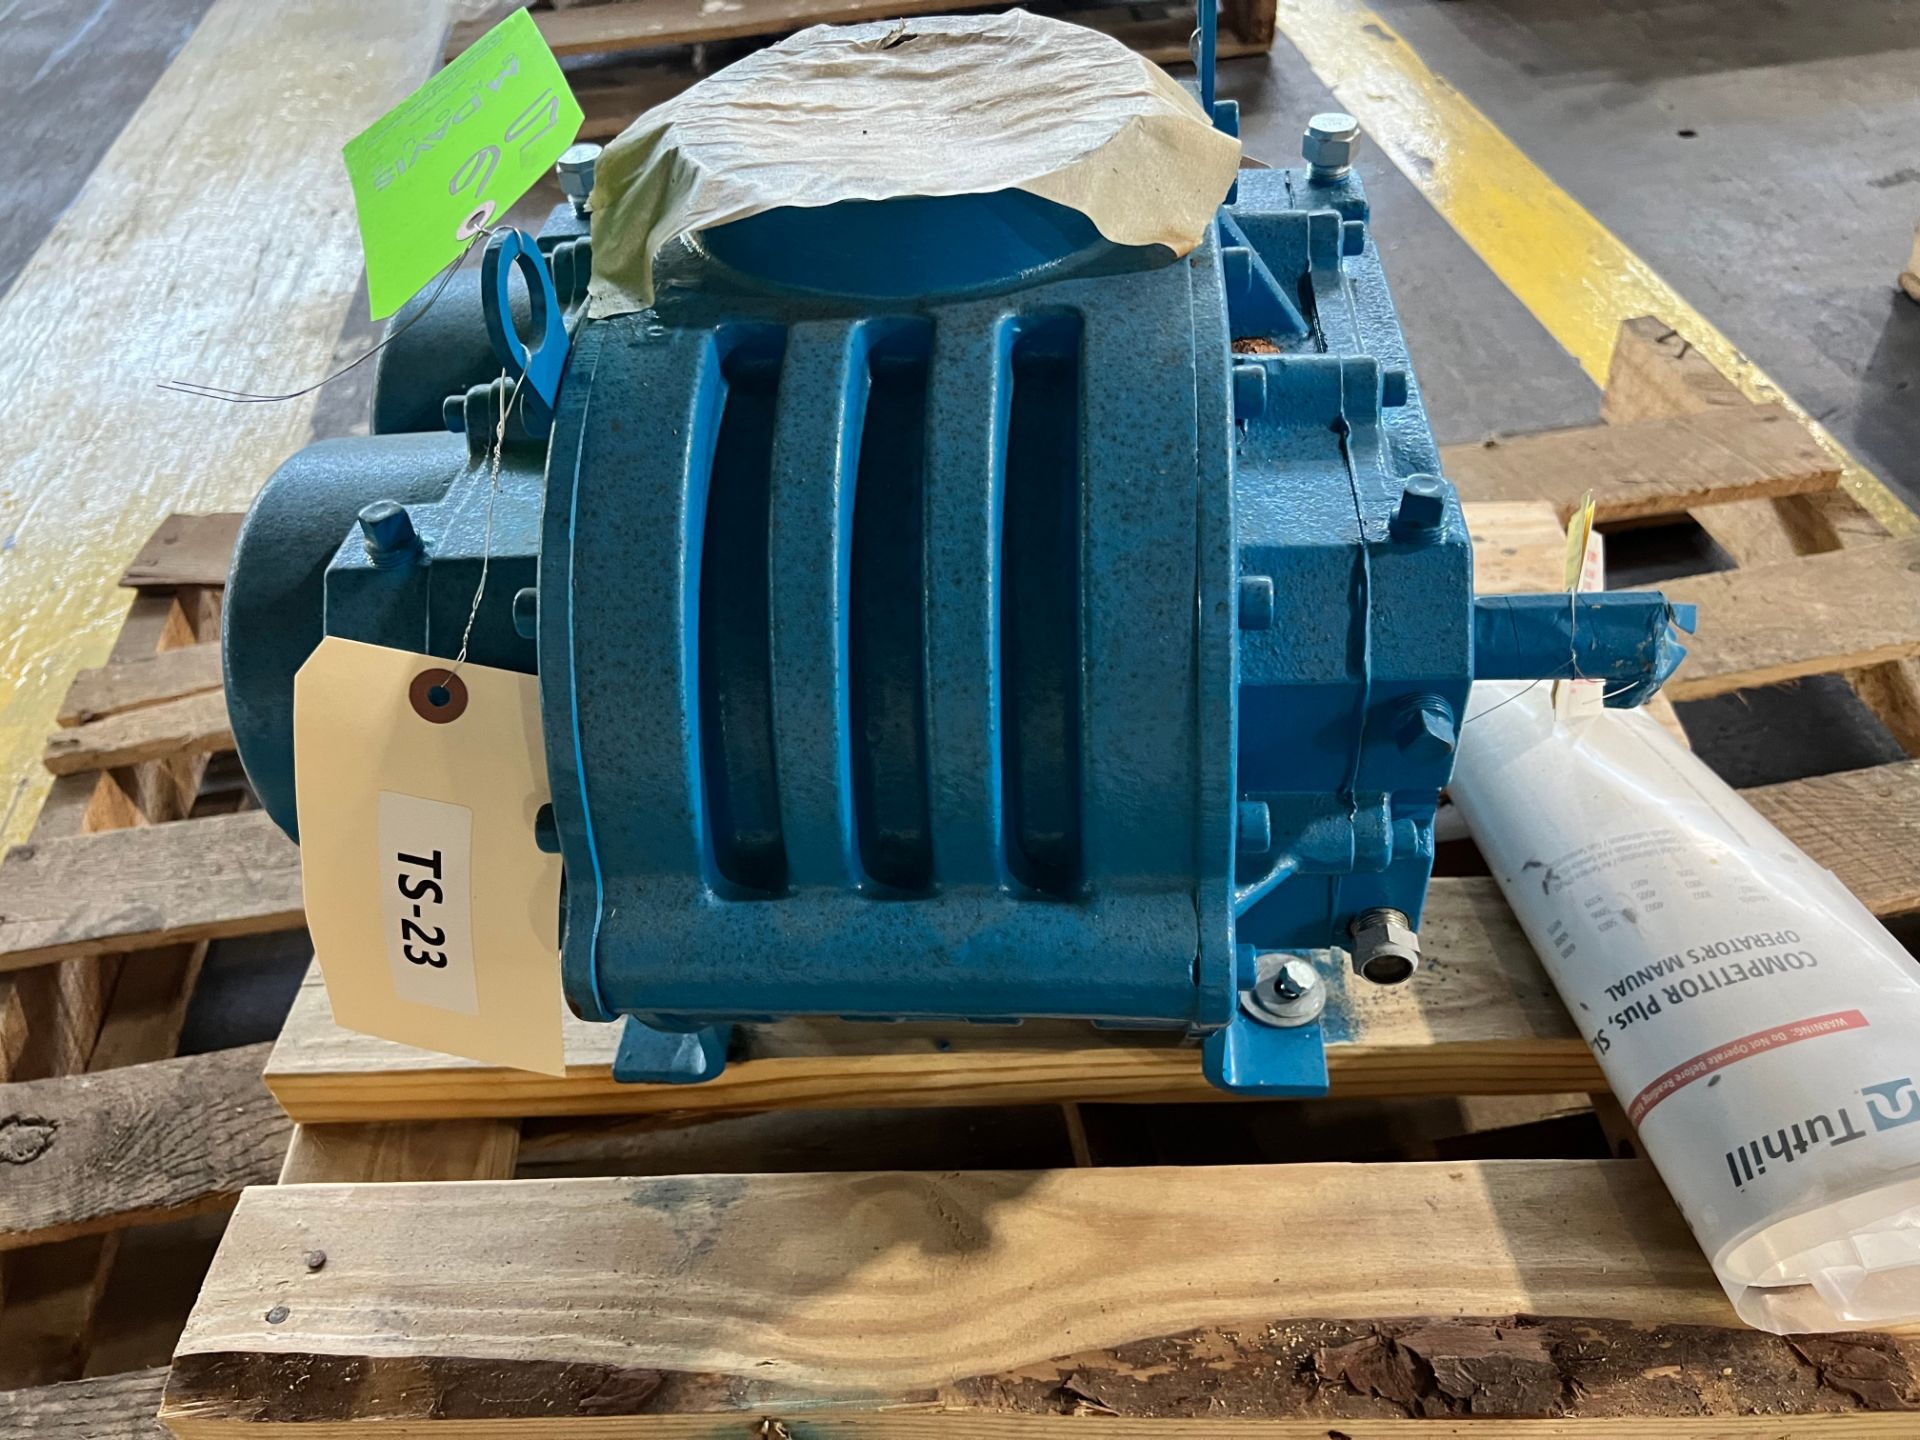 NEW 2016 TUTHILL ROTARY POSITIVE DISPLACEMENT BLOWER PUMP HEAD, MODEL 5006-22L 3N, S/N 3366161602, - Image 4 of 5